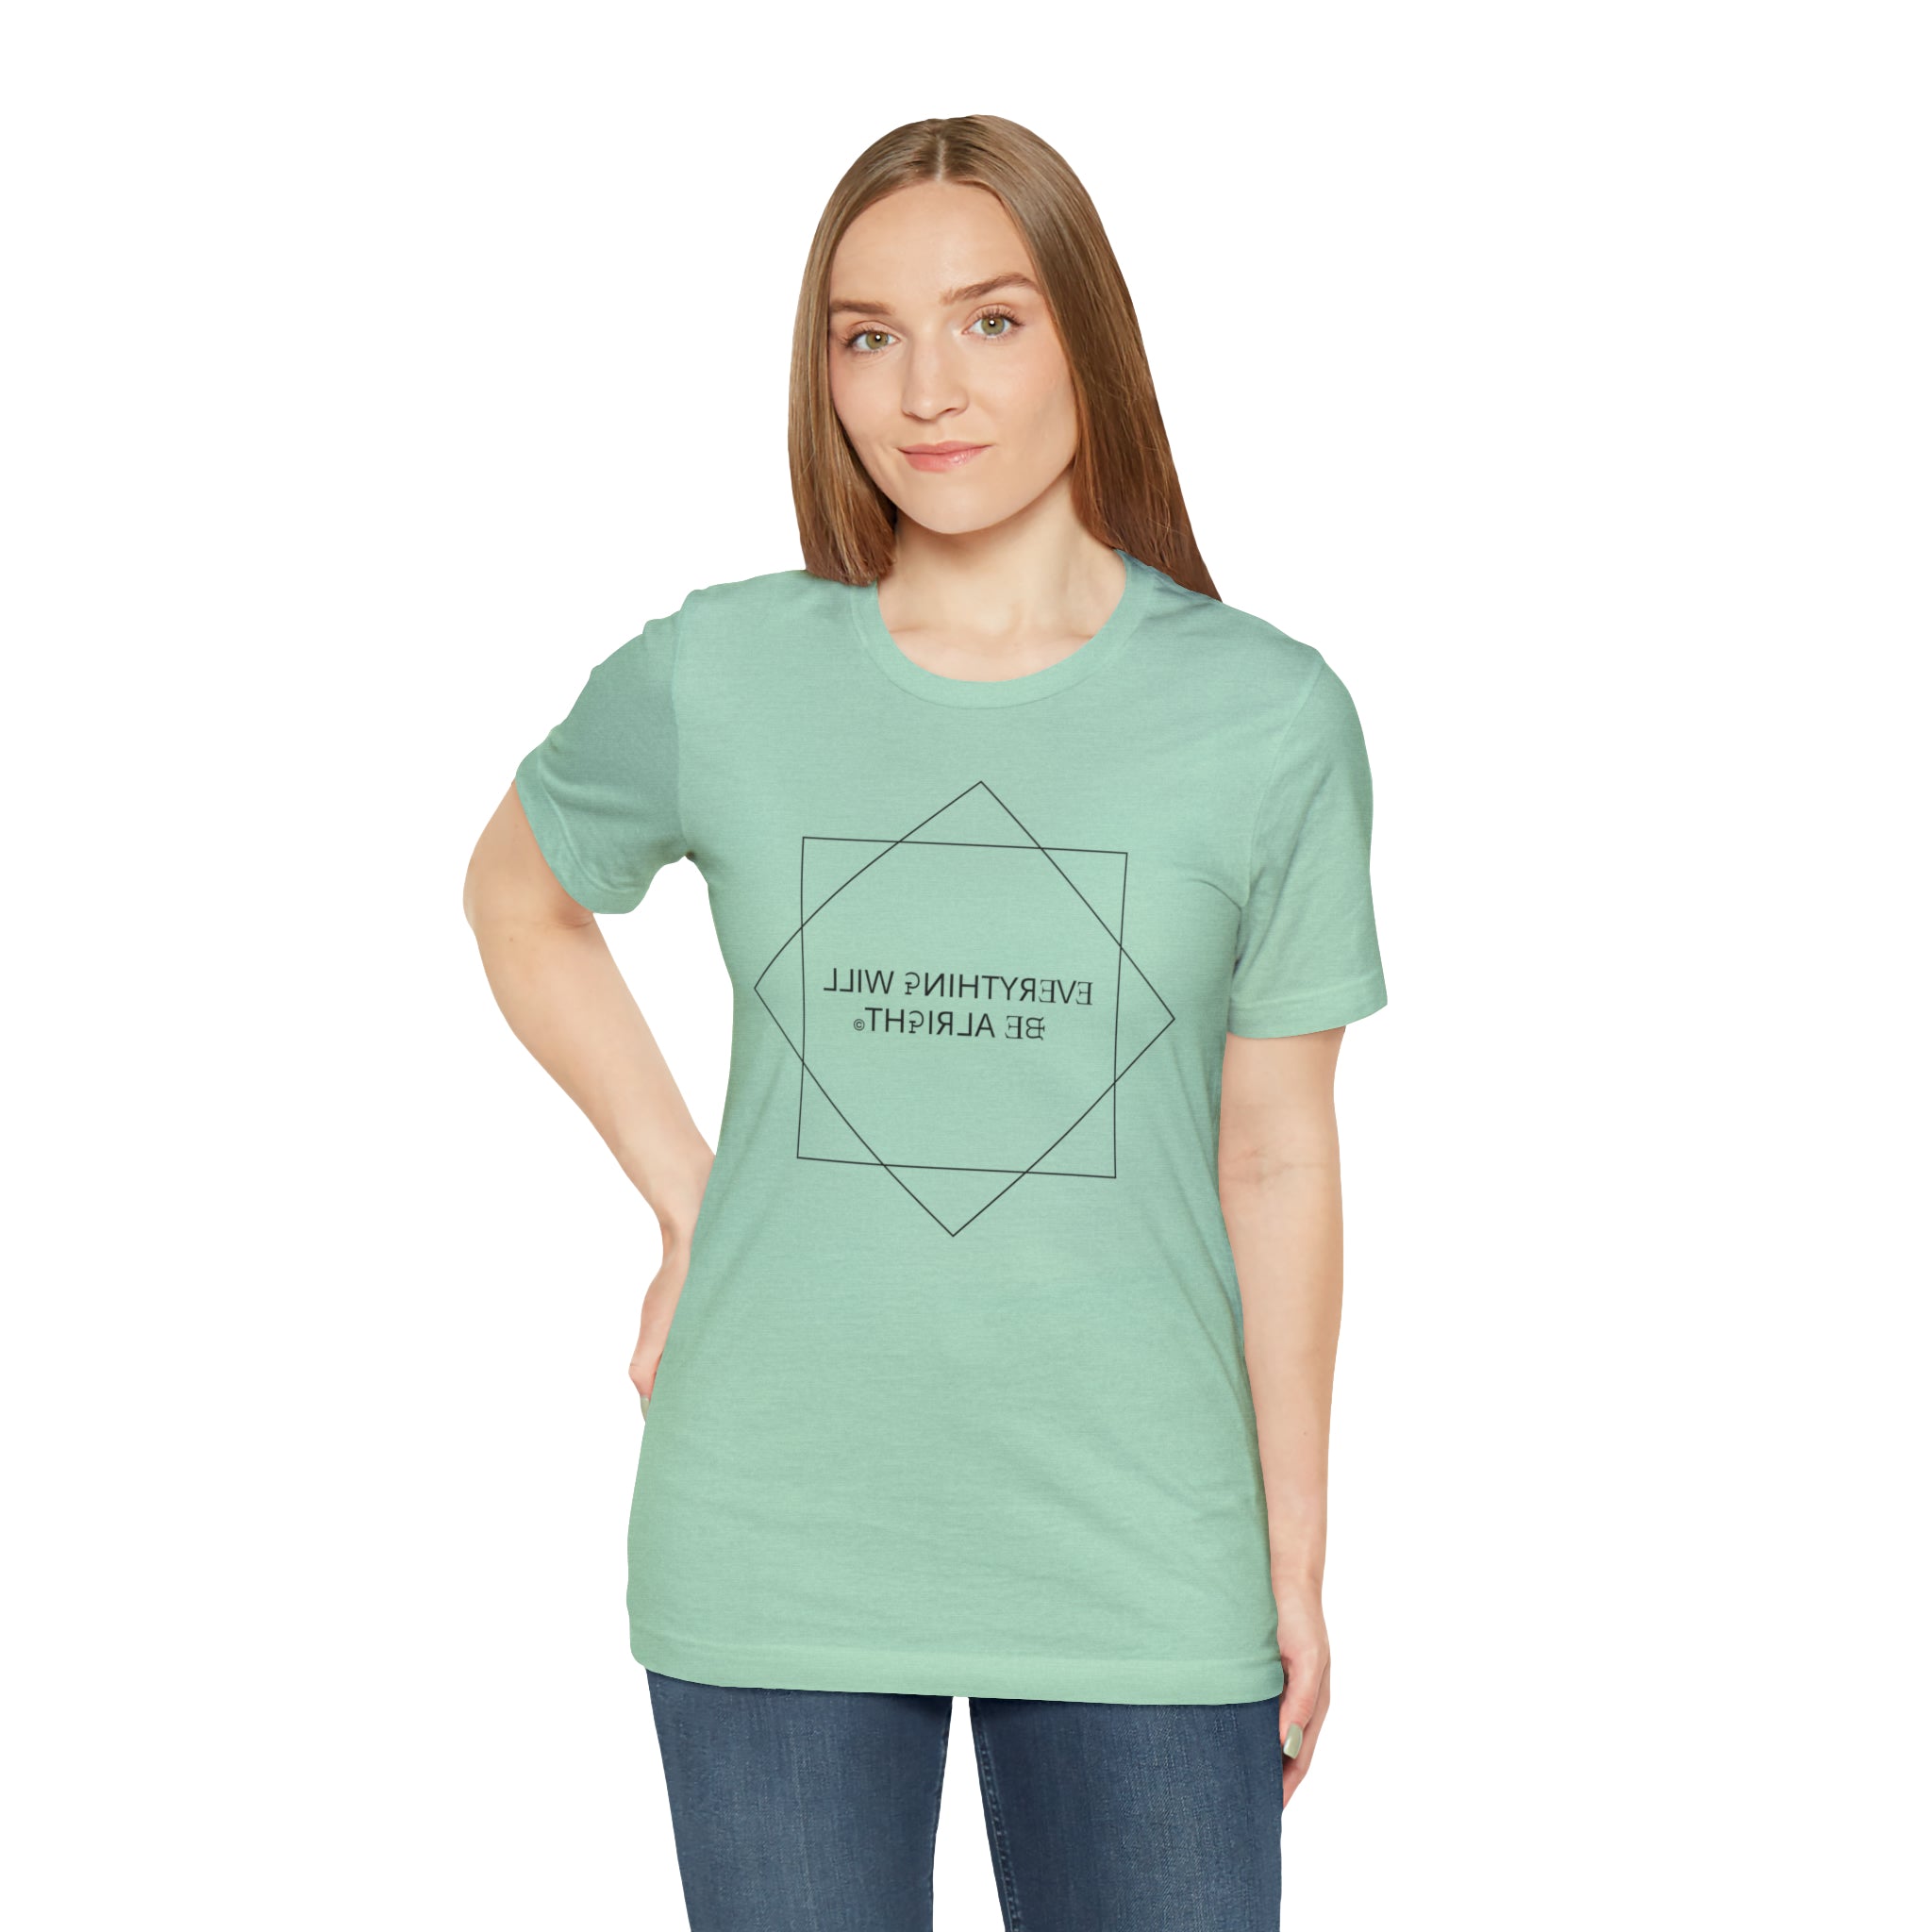 "Everything Will be Alright" Women's Short Sleeve Tee